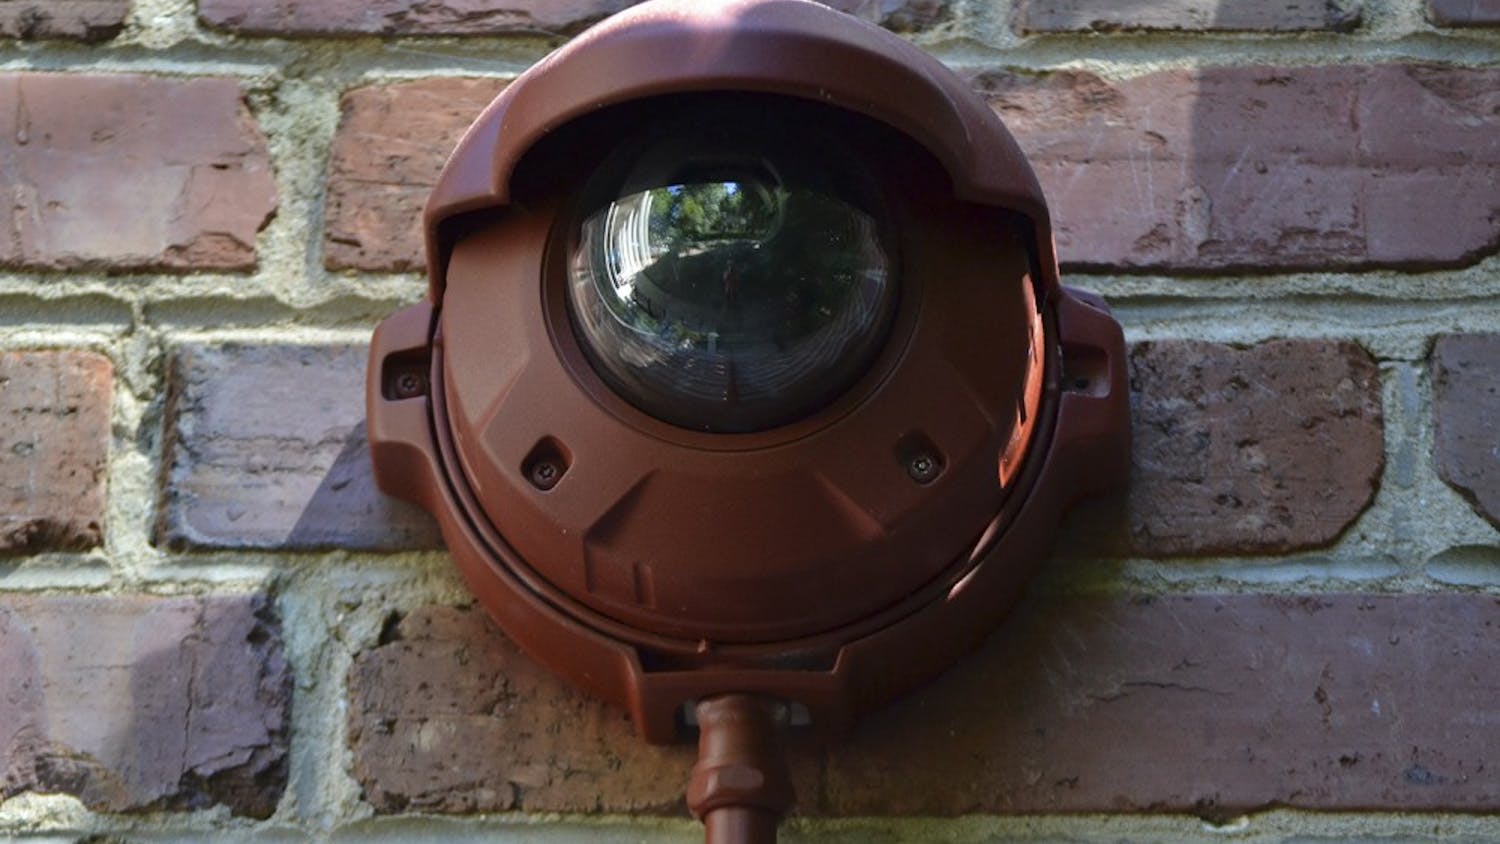 Cameras have been installed on Graham Memorial Hall and Hyde Hall to provide surveillance to the statue of "Silent Sam" on Monday morning Sept. 14. The camera on Graham Memorial can be found in the corner of the building, notable by its red piping.